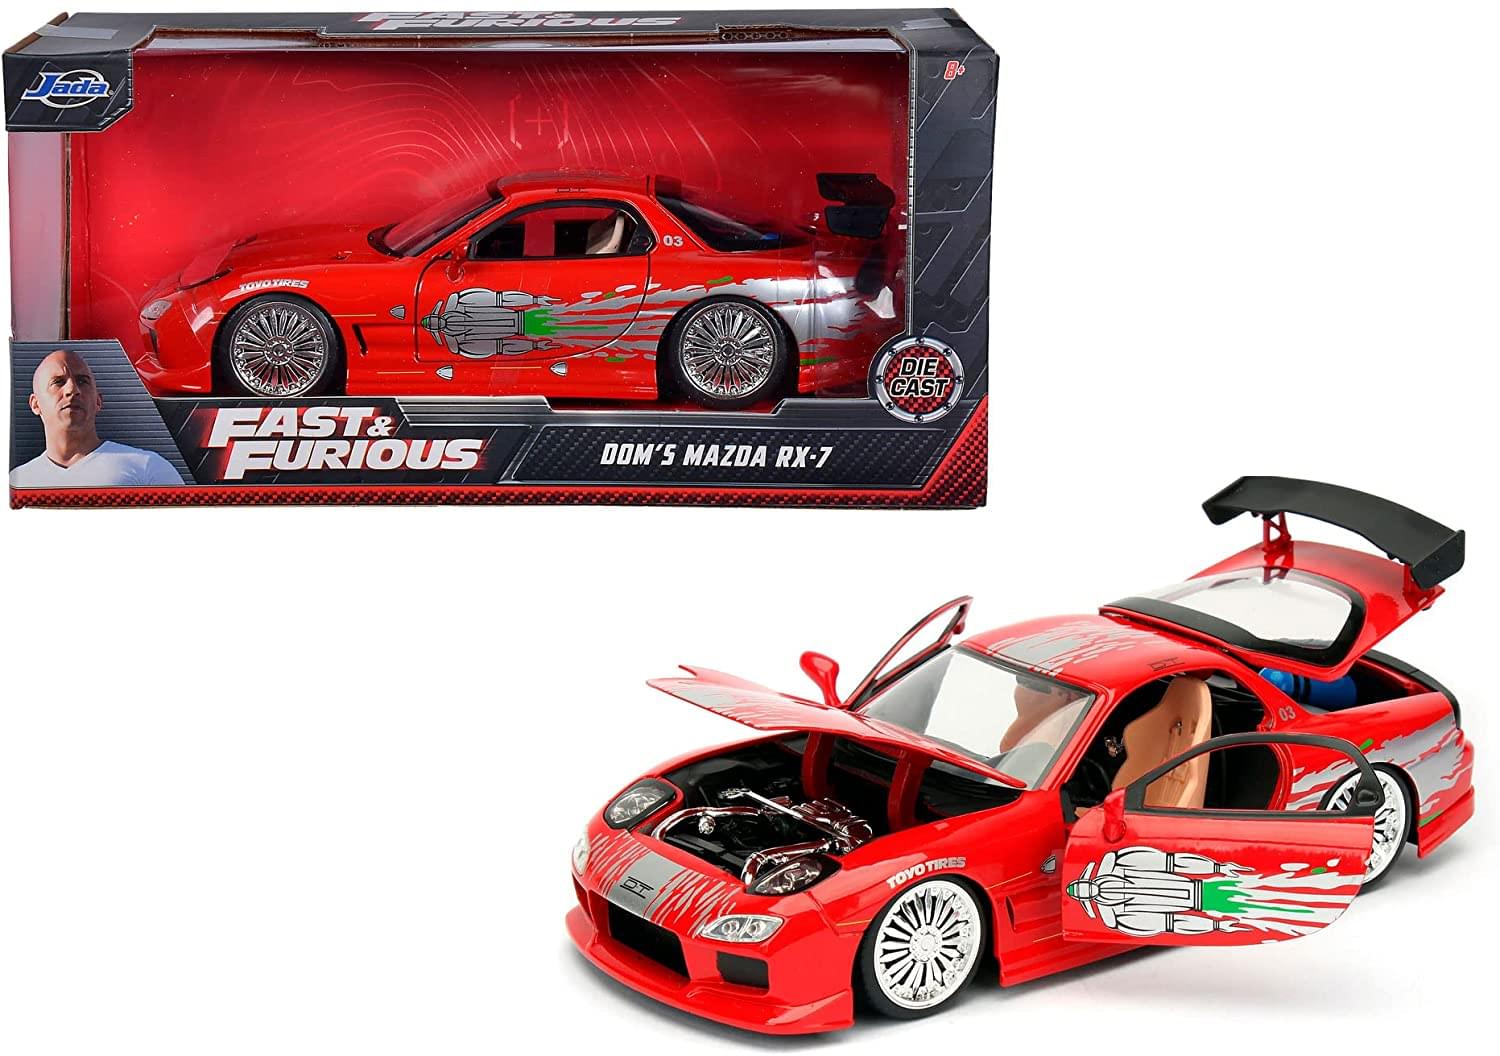 Fast and Furious 1:24 Doms 1993 Mazda RX-7 Diecast Car